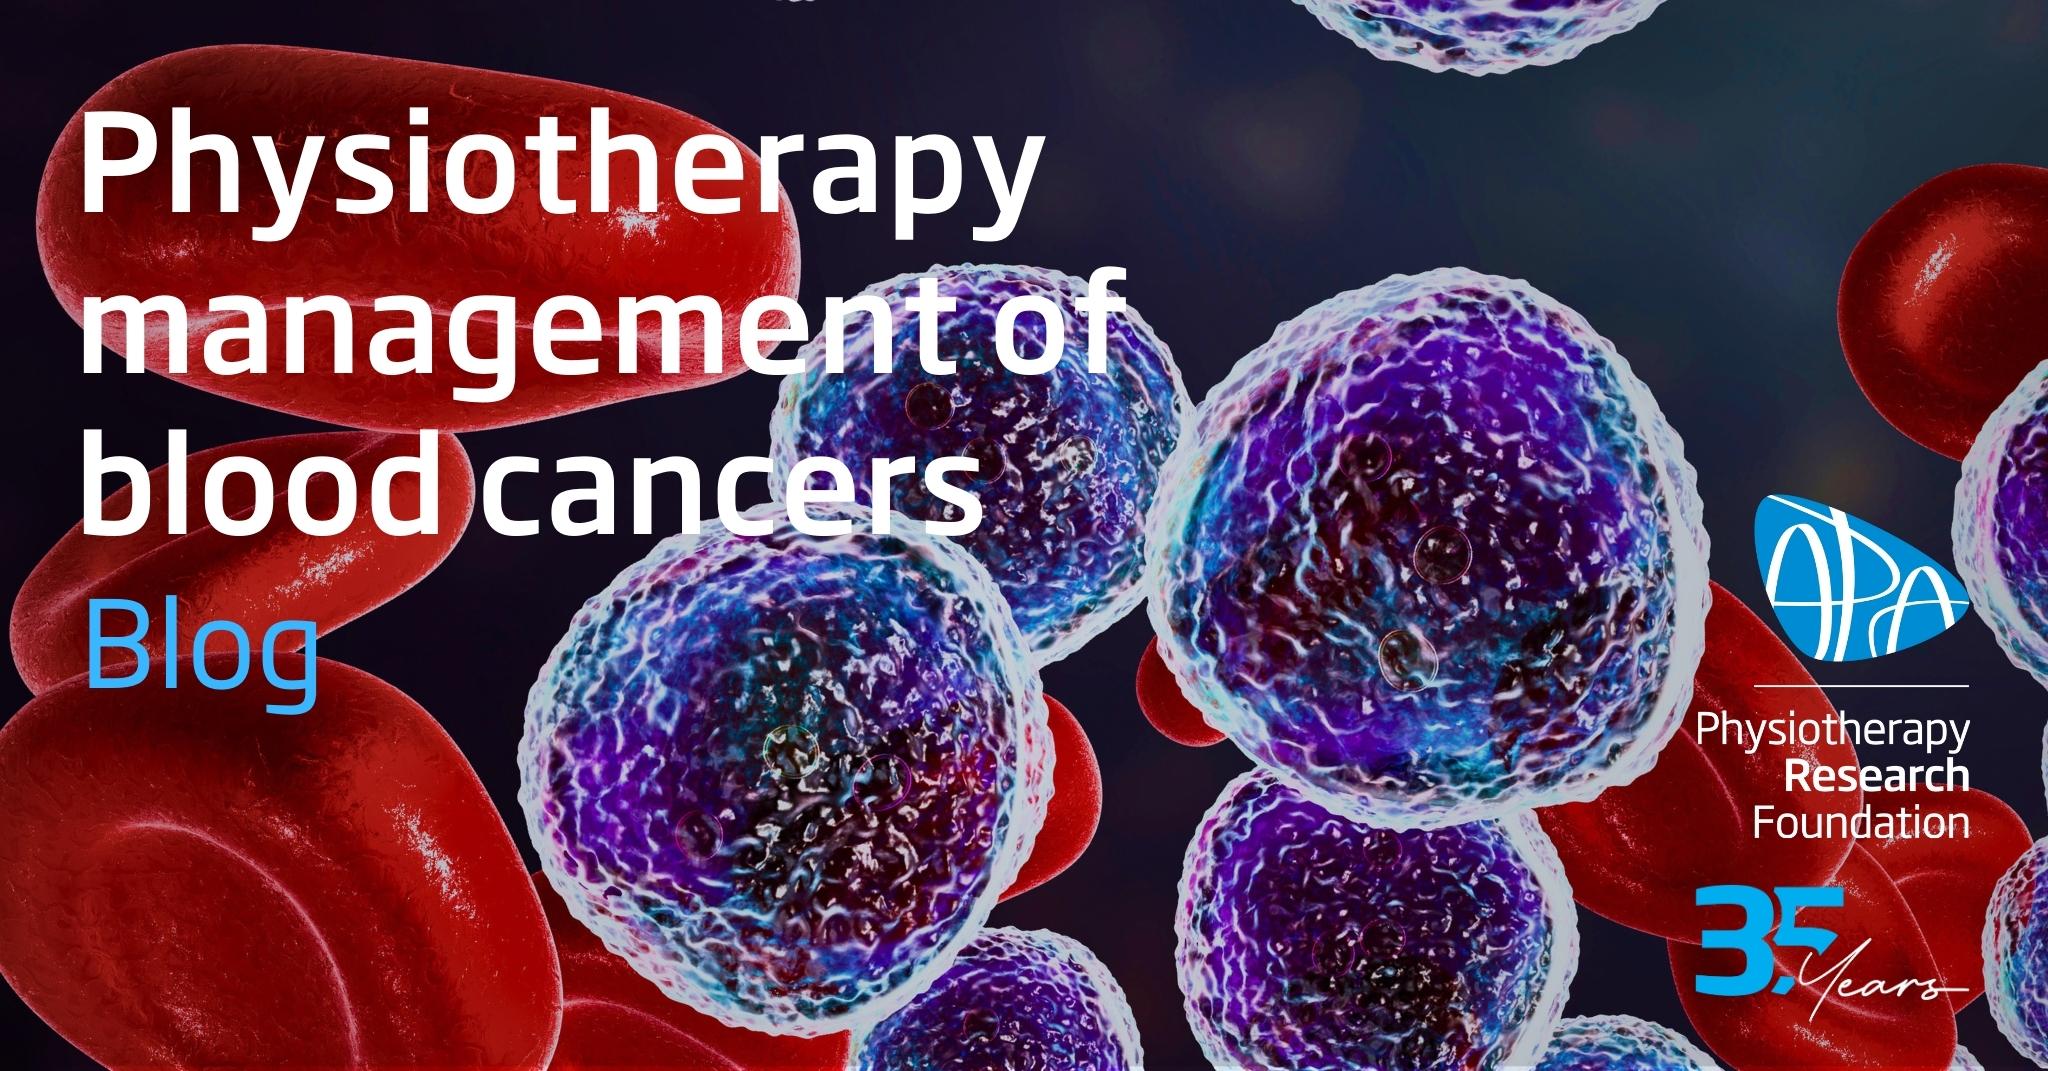 Physiotherapy management of blood cancers